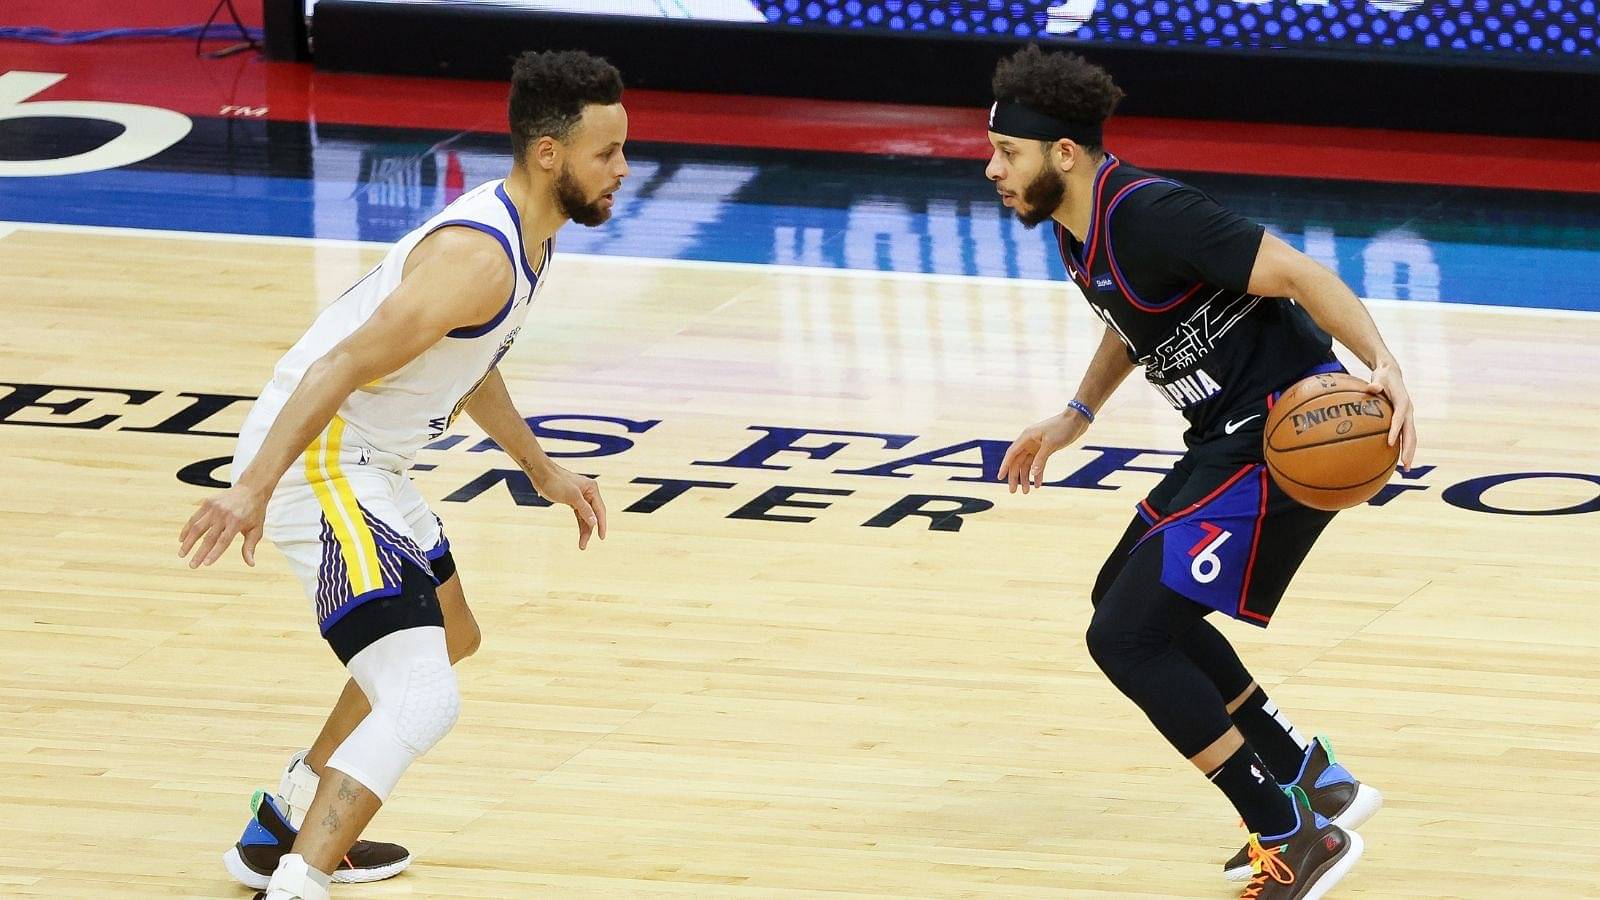 "Seth made me change my favorite team": Stephen Curry accepts Nets are his favorite team to follow over the Sixers after his younger brother got traded